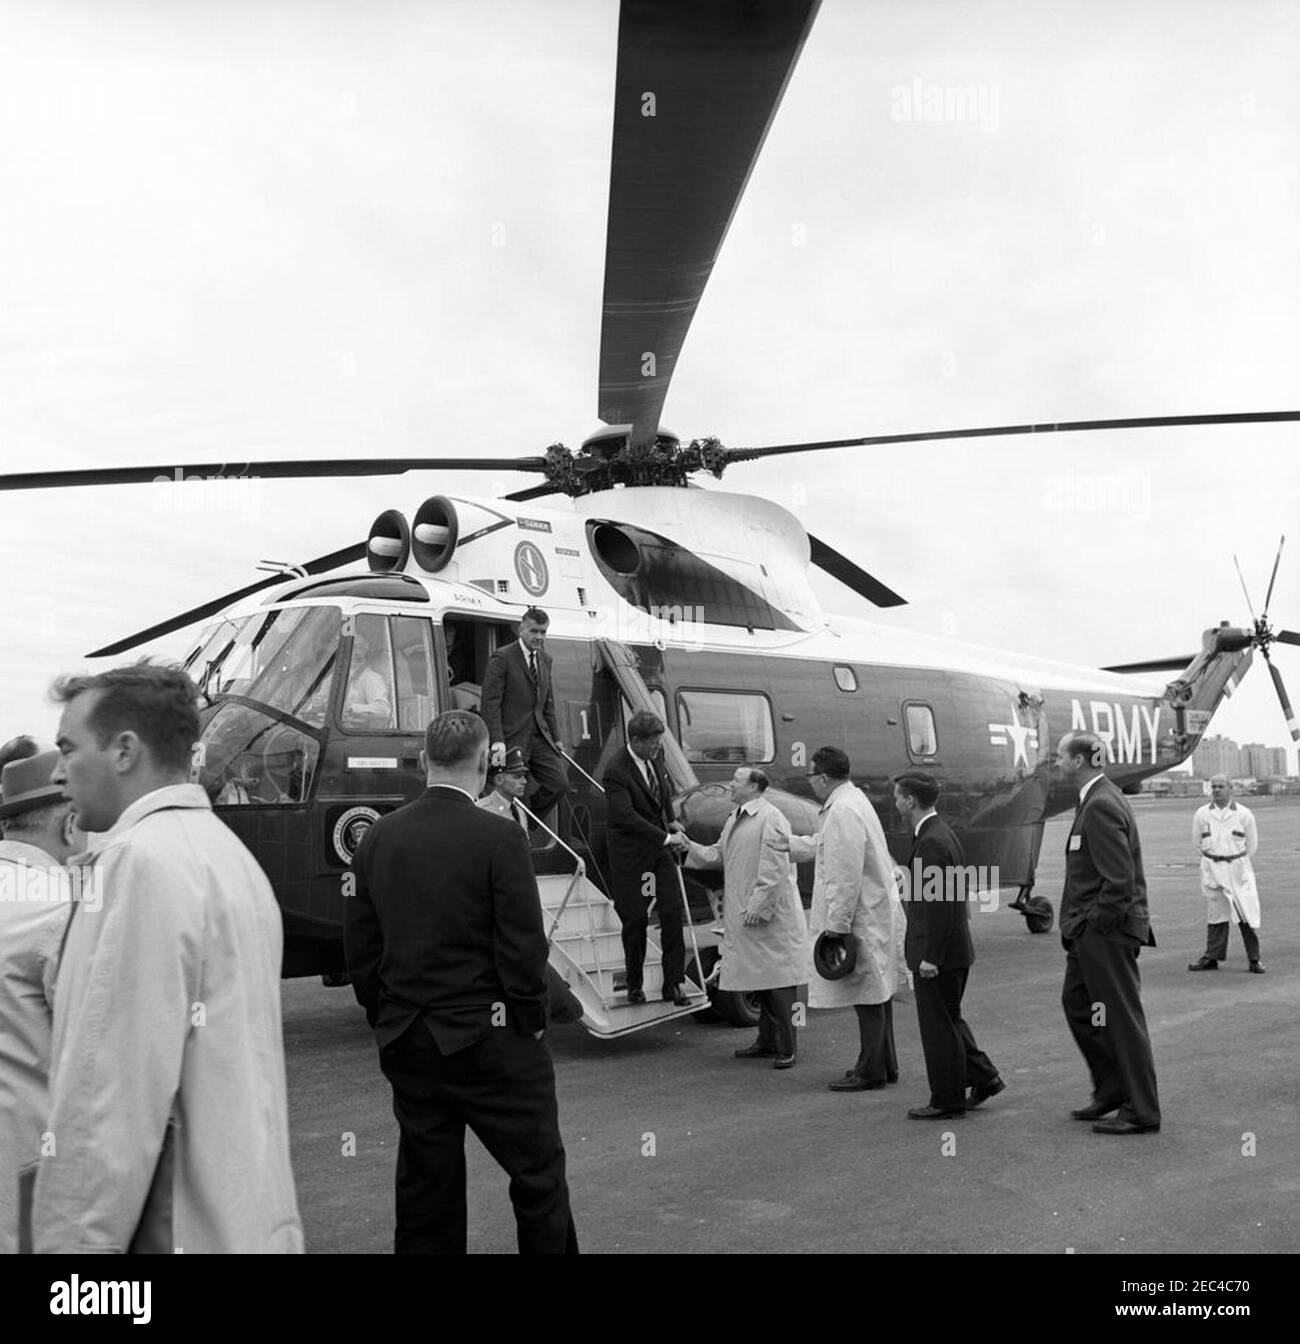 Arrival at and departure by helicopter from Bader Field, Atlantic City, New Jersey. President John F. Kennedy shakes hands with President of United Automobile Workers of America (UAW), Walter P. Reuther, upon arriving at Bader Field in Atlantic City, New Jersey. Governor of New Jersey, Richard J. Hughes, stands right of Mr. Reuther. Also pictured: United States Army presidential helicopter pilot, Barney Hulett; White House Secret Service agents, Dave Grant and Gerald A. u201cJerryu201d Behn. Stock Photo